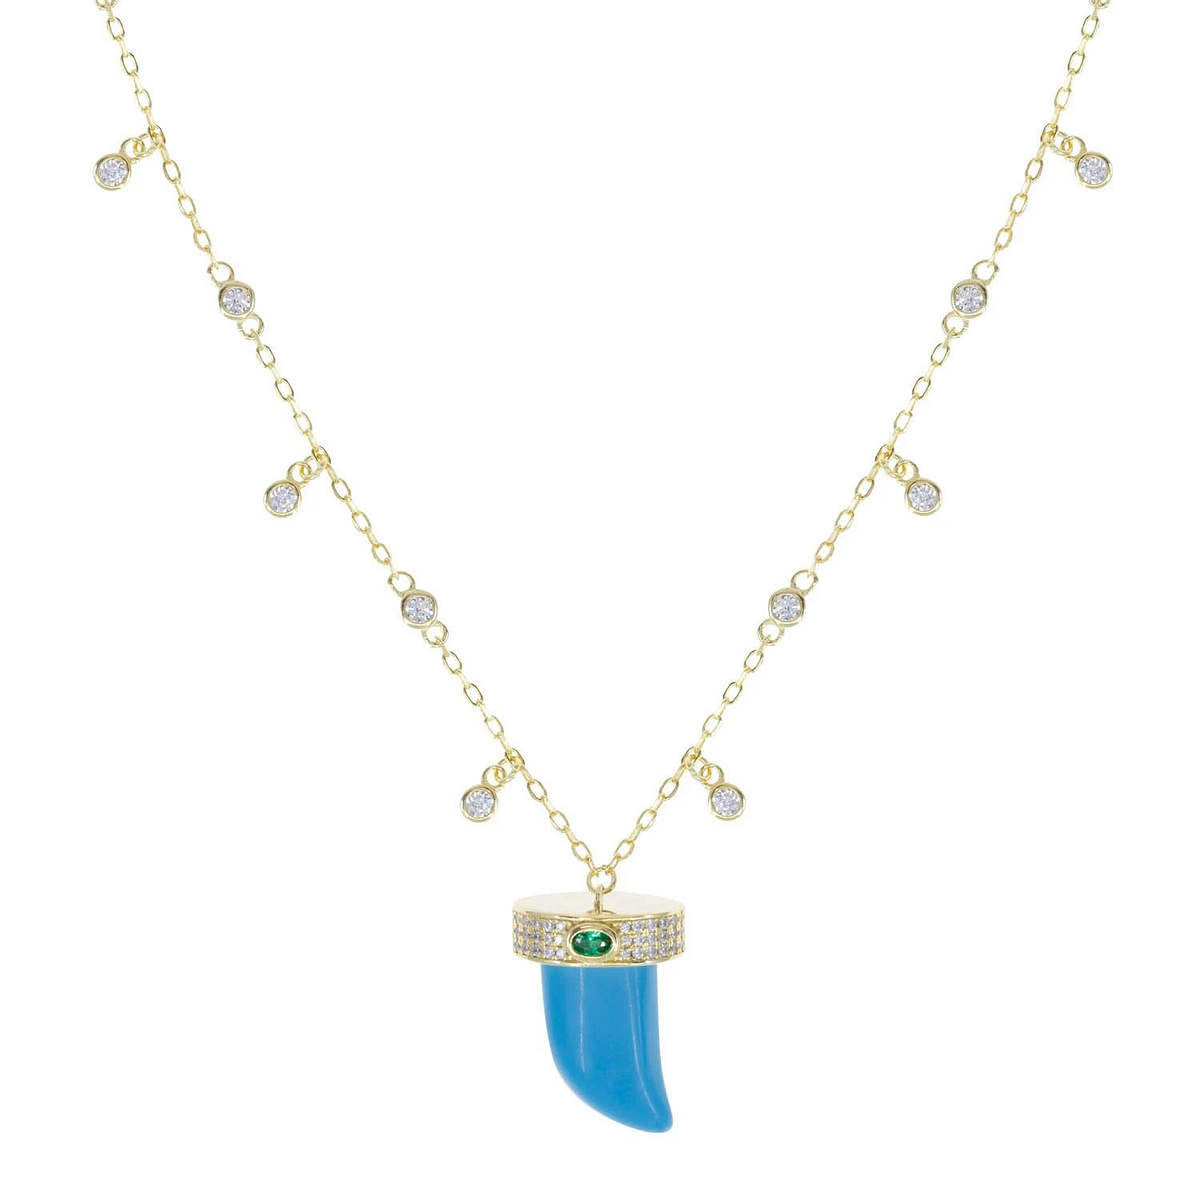 Tiger Tooth Necklace in Turquoise